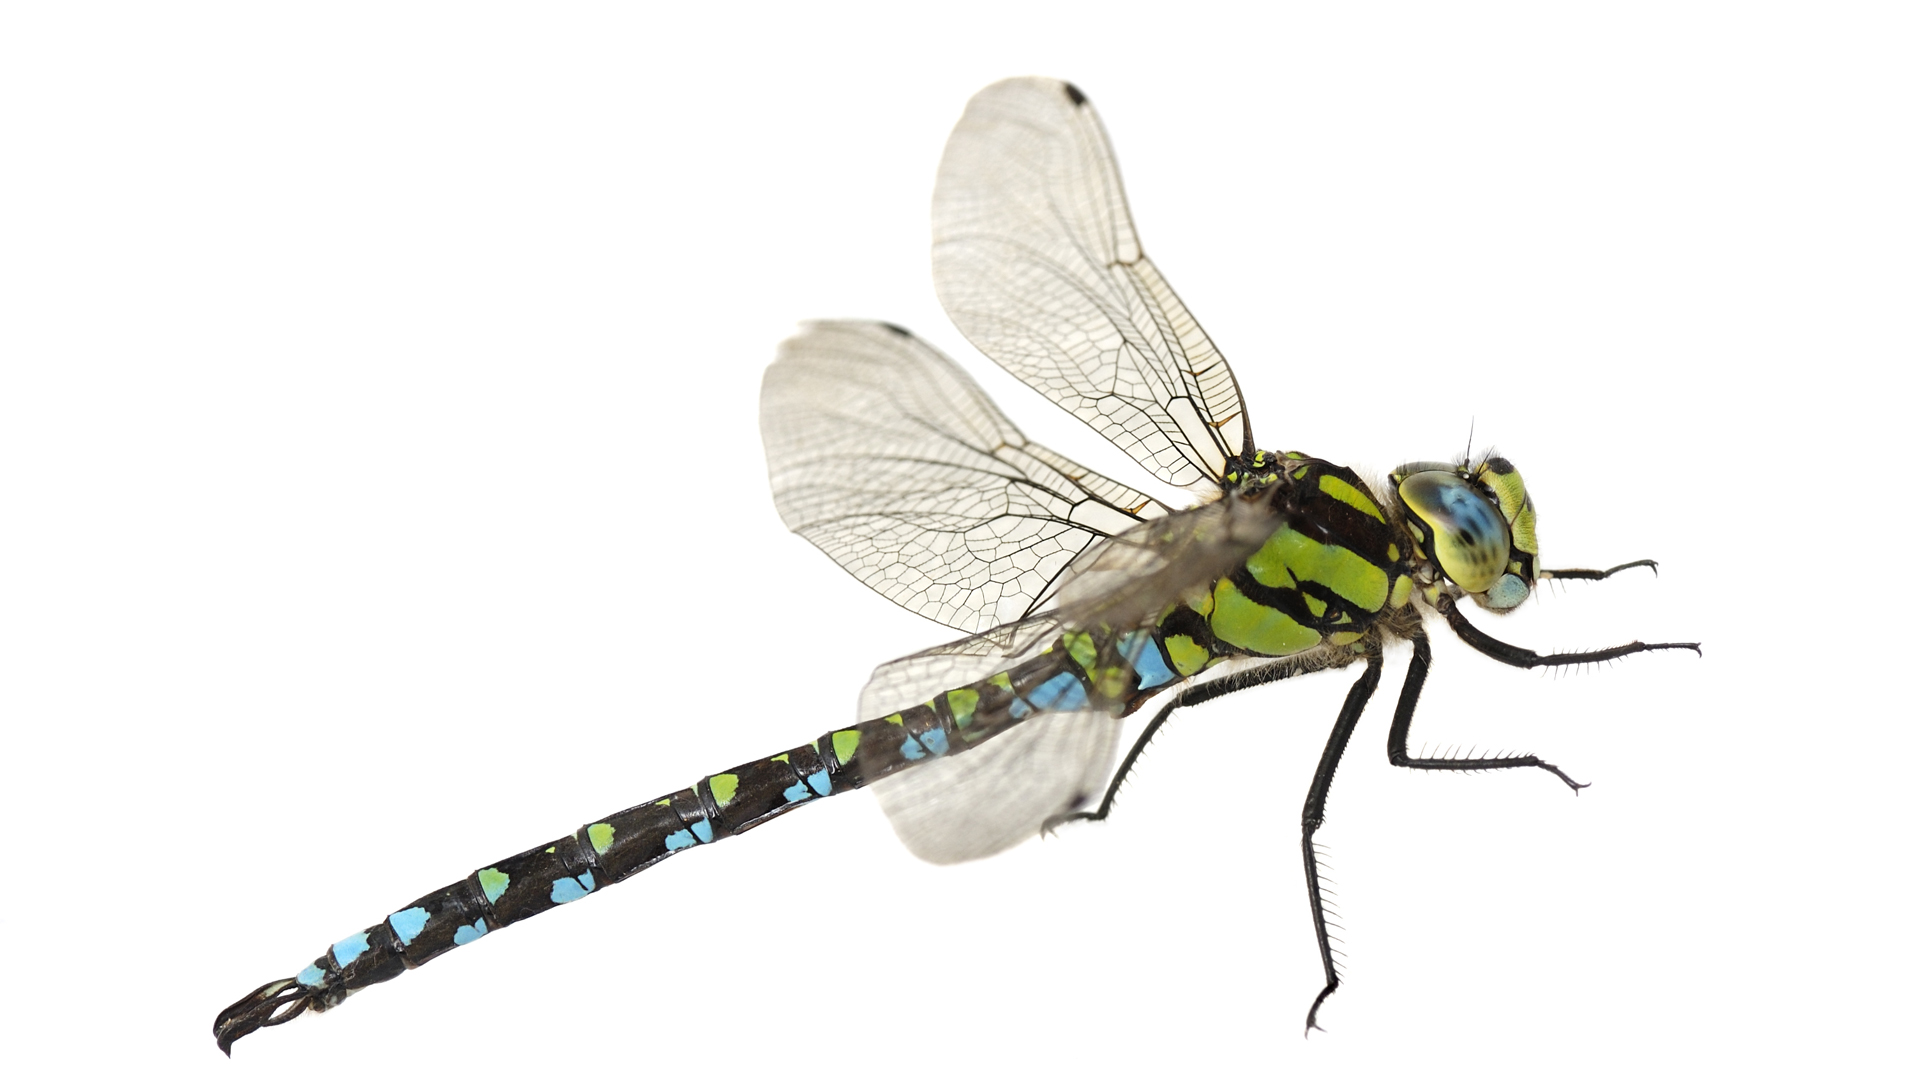 CONDENSED-dragonfly-2